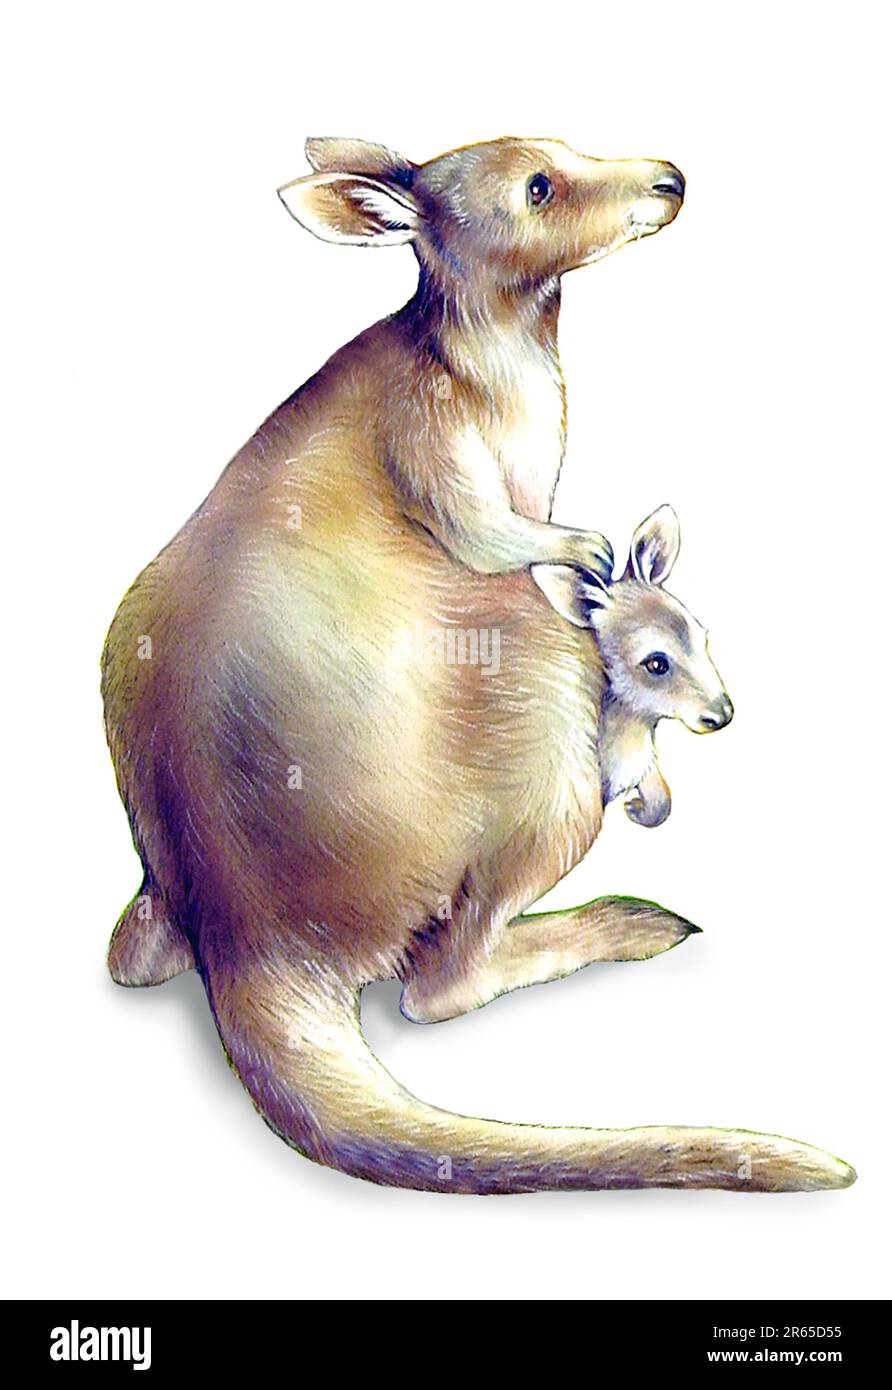 Animals-Kangaroo with Joey in pouch Stock Photo